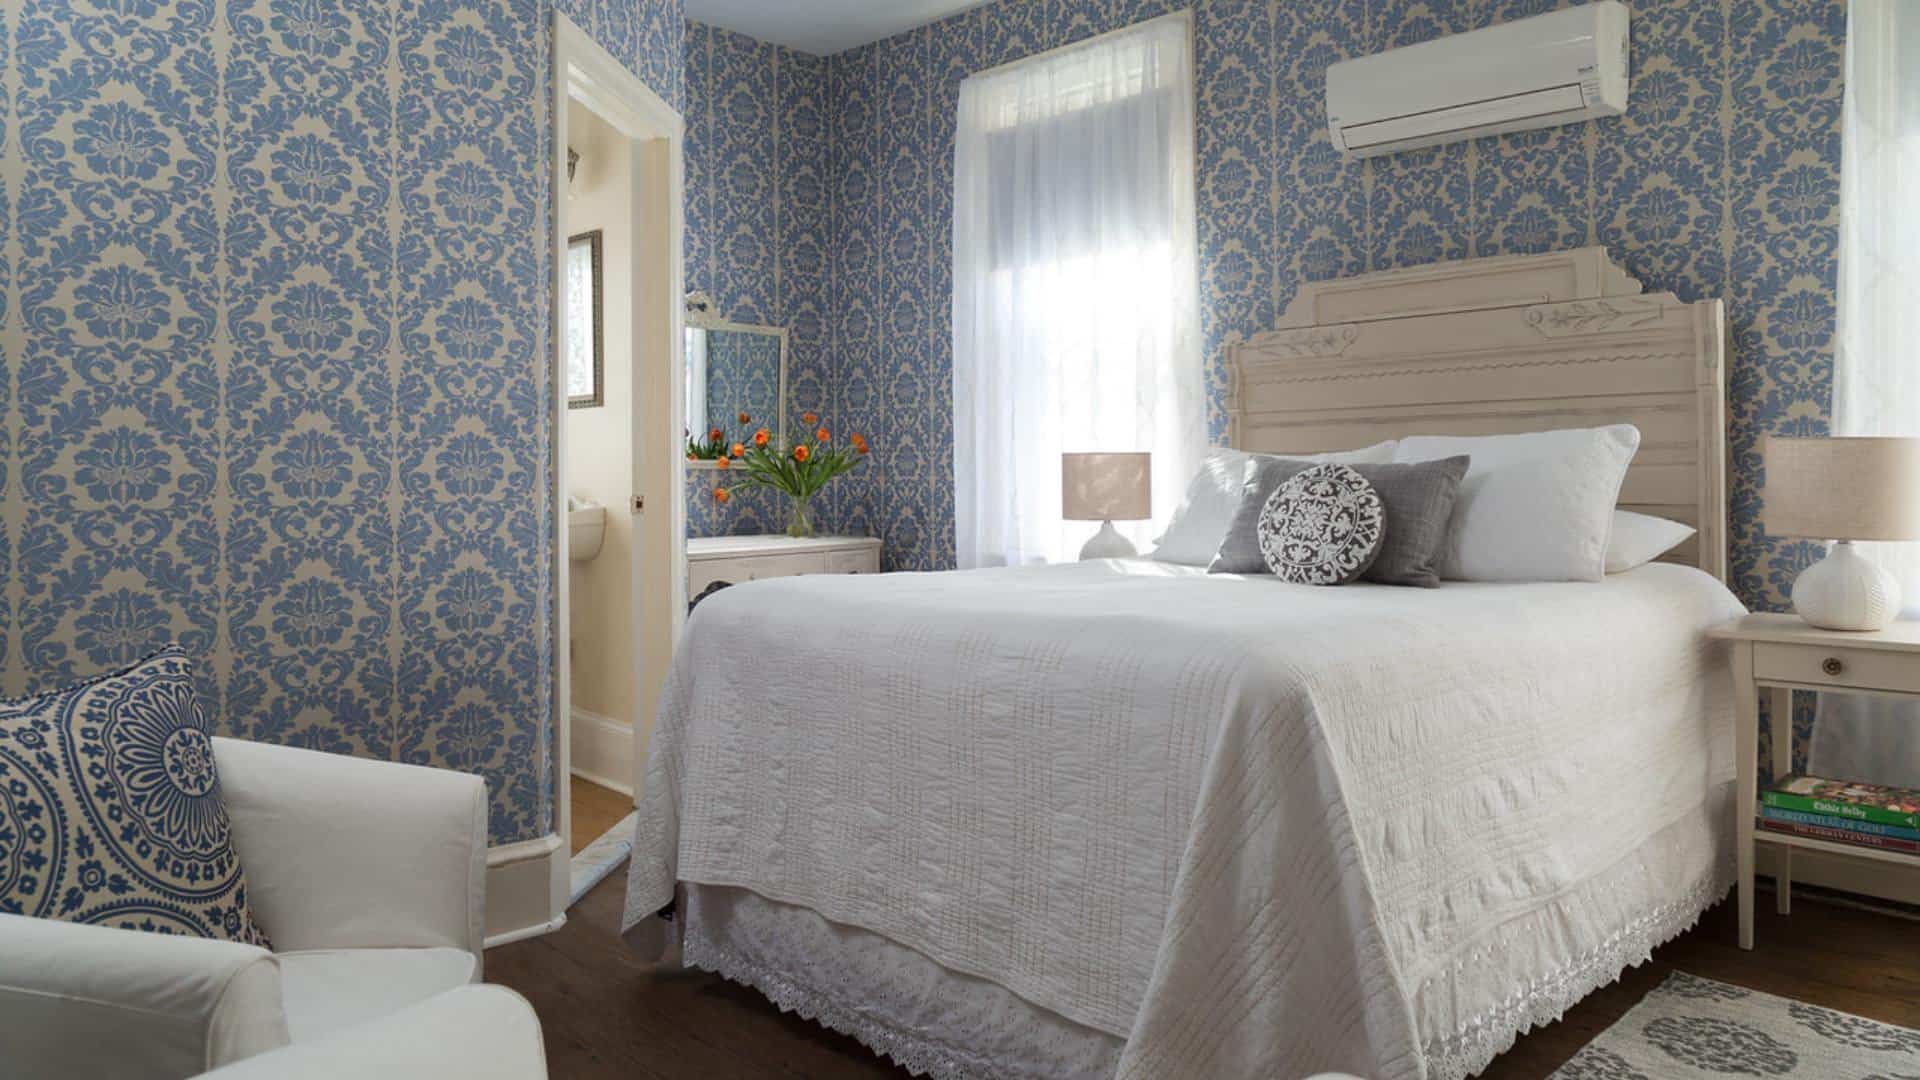 Bedroom with light-colored ornate headboard, white bedding, hardwood flooring, brocade blue wallpaper, and sitting area with white slipcovered chairs